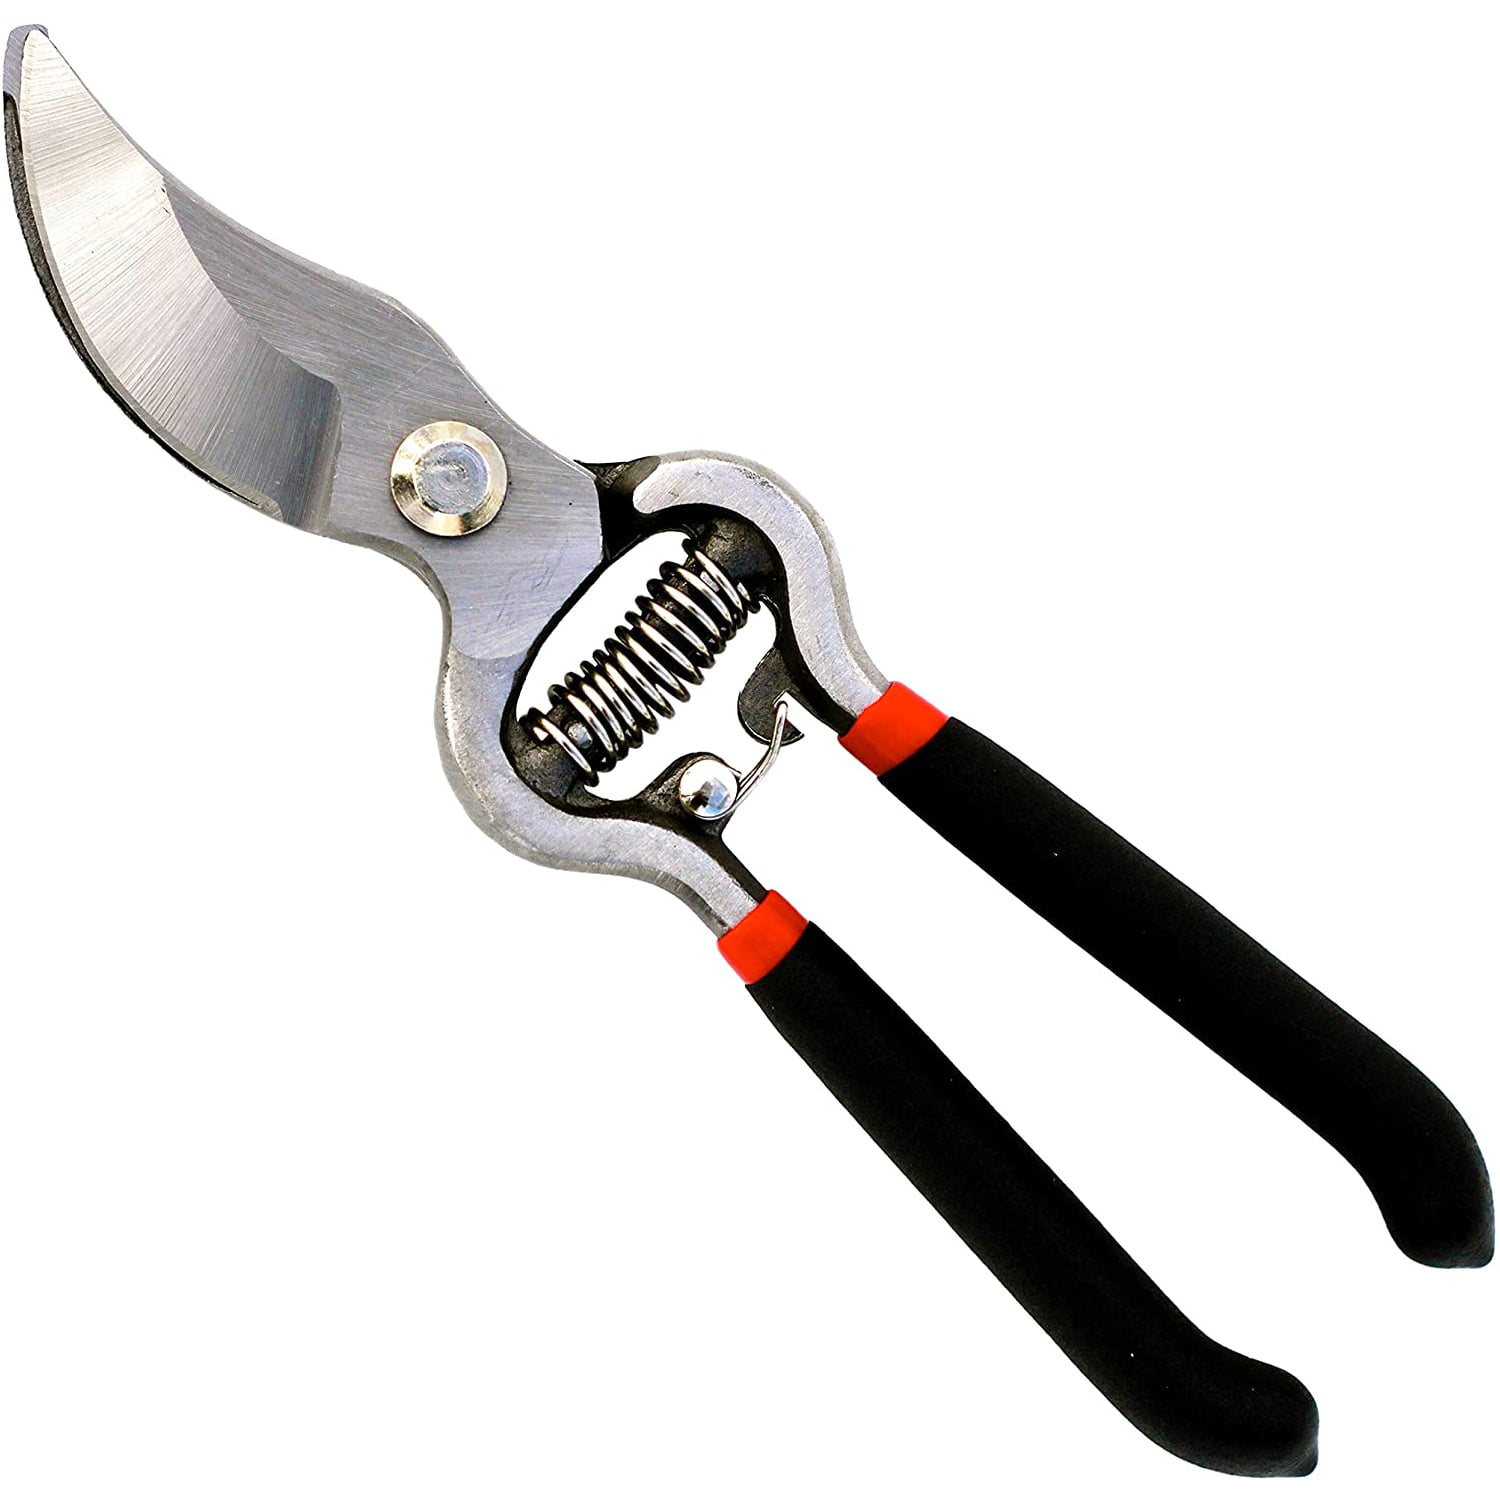 Carbon Steel Small Branch Shears fully whole-piece drop forged,len 185mm 